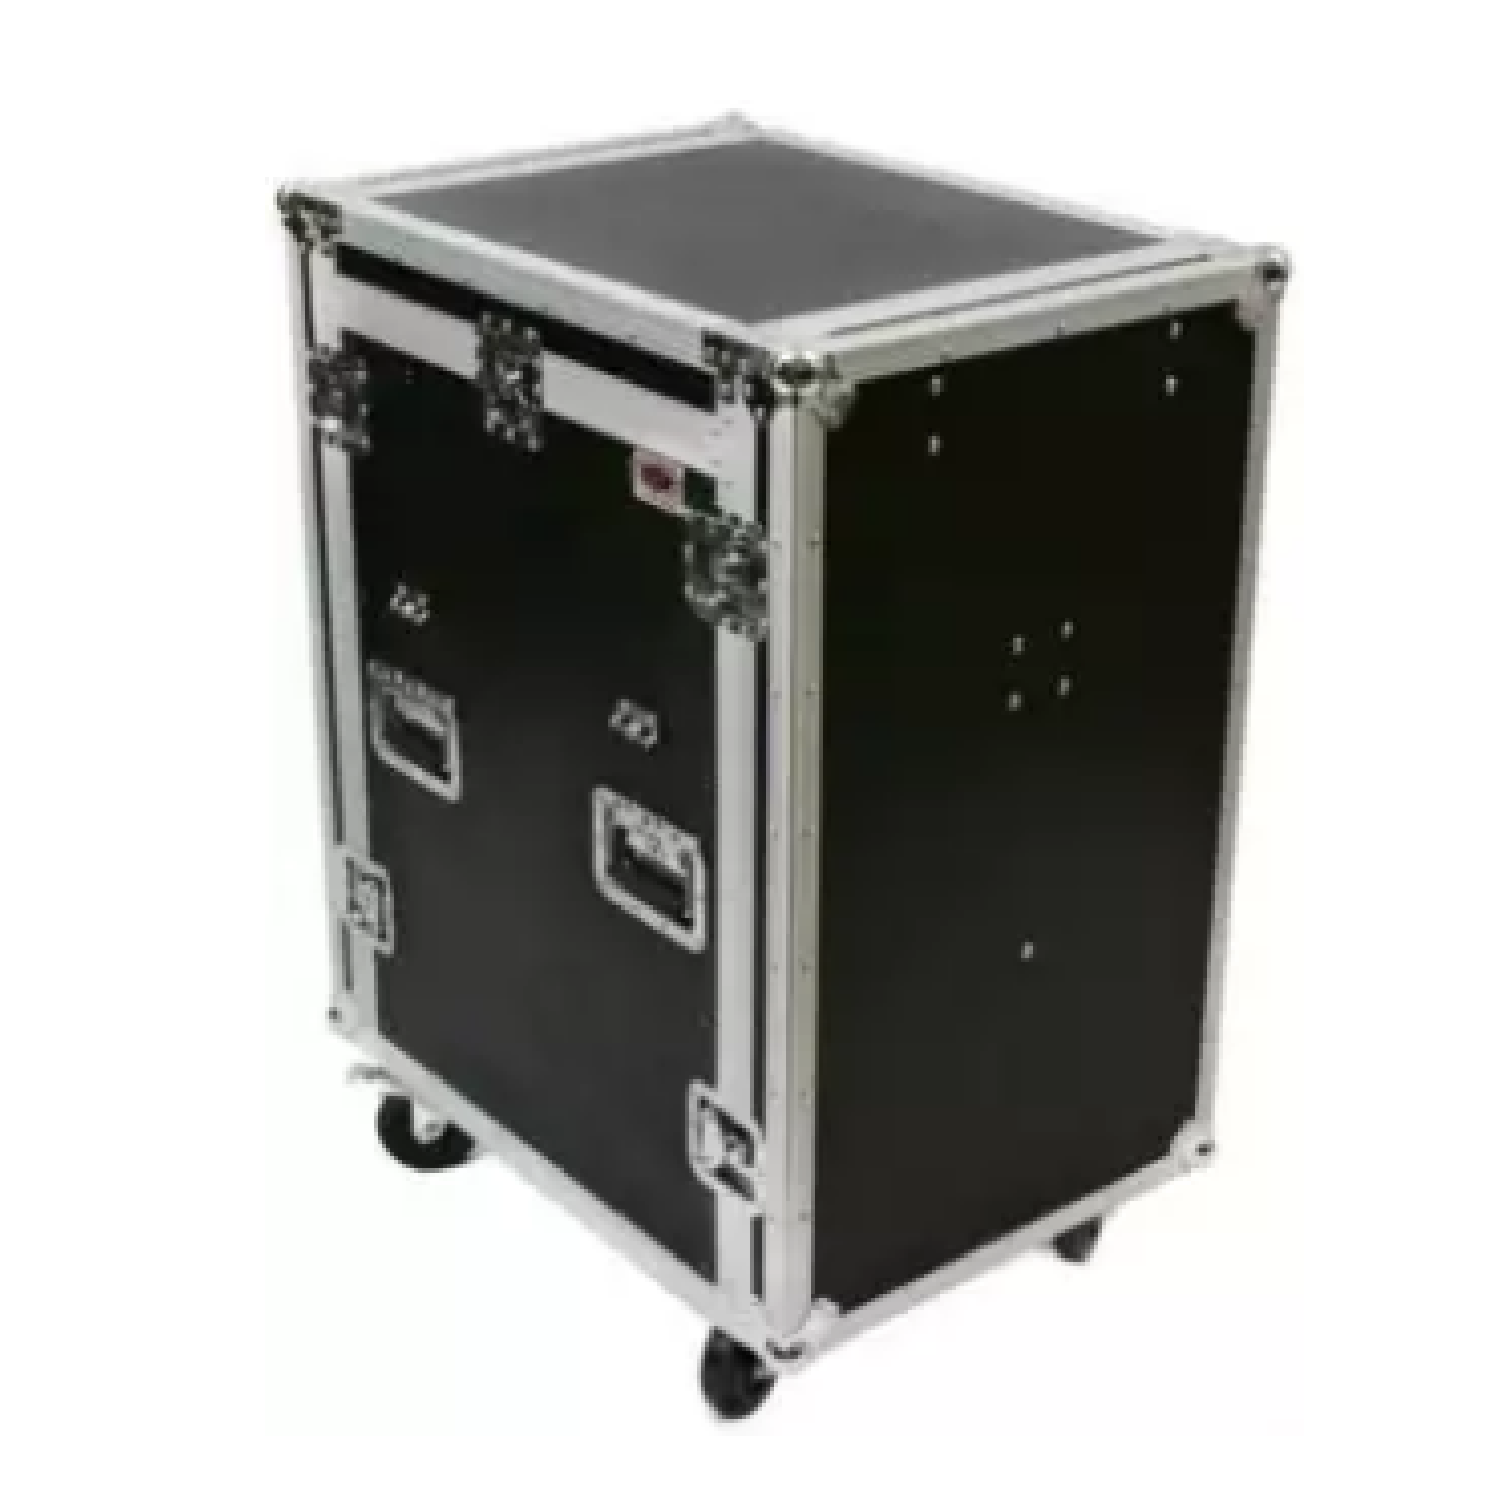 Three Lids, with 4 Inches Castors Shockproof Combination Racks with Mixer   CA14U procase